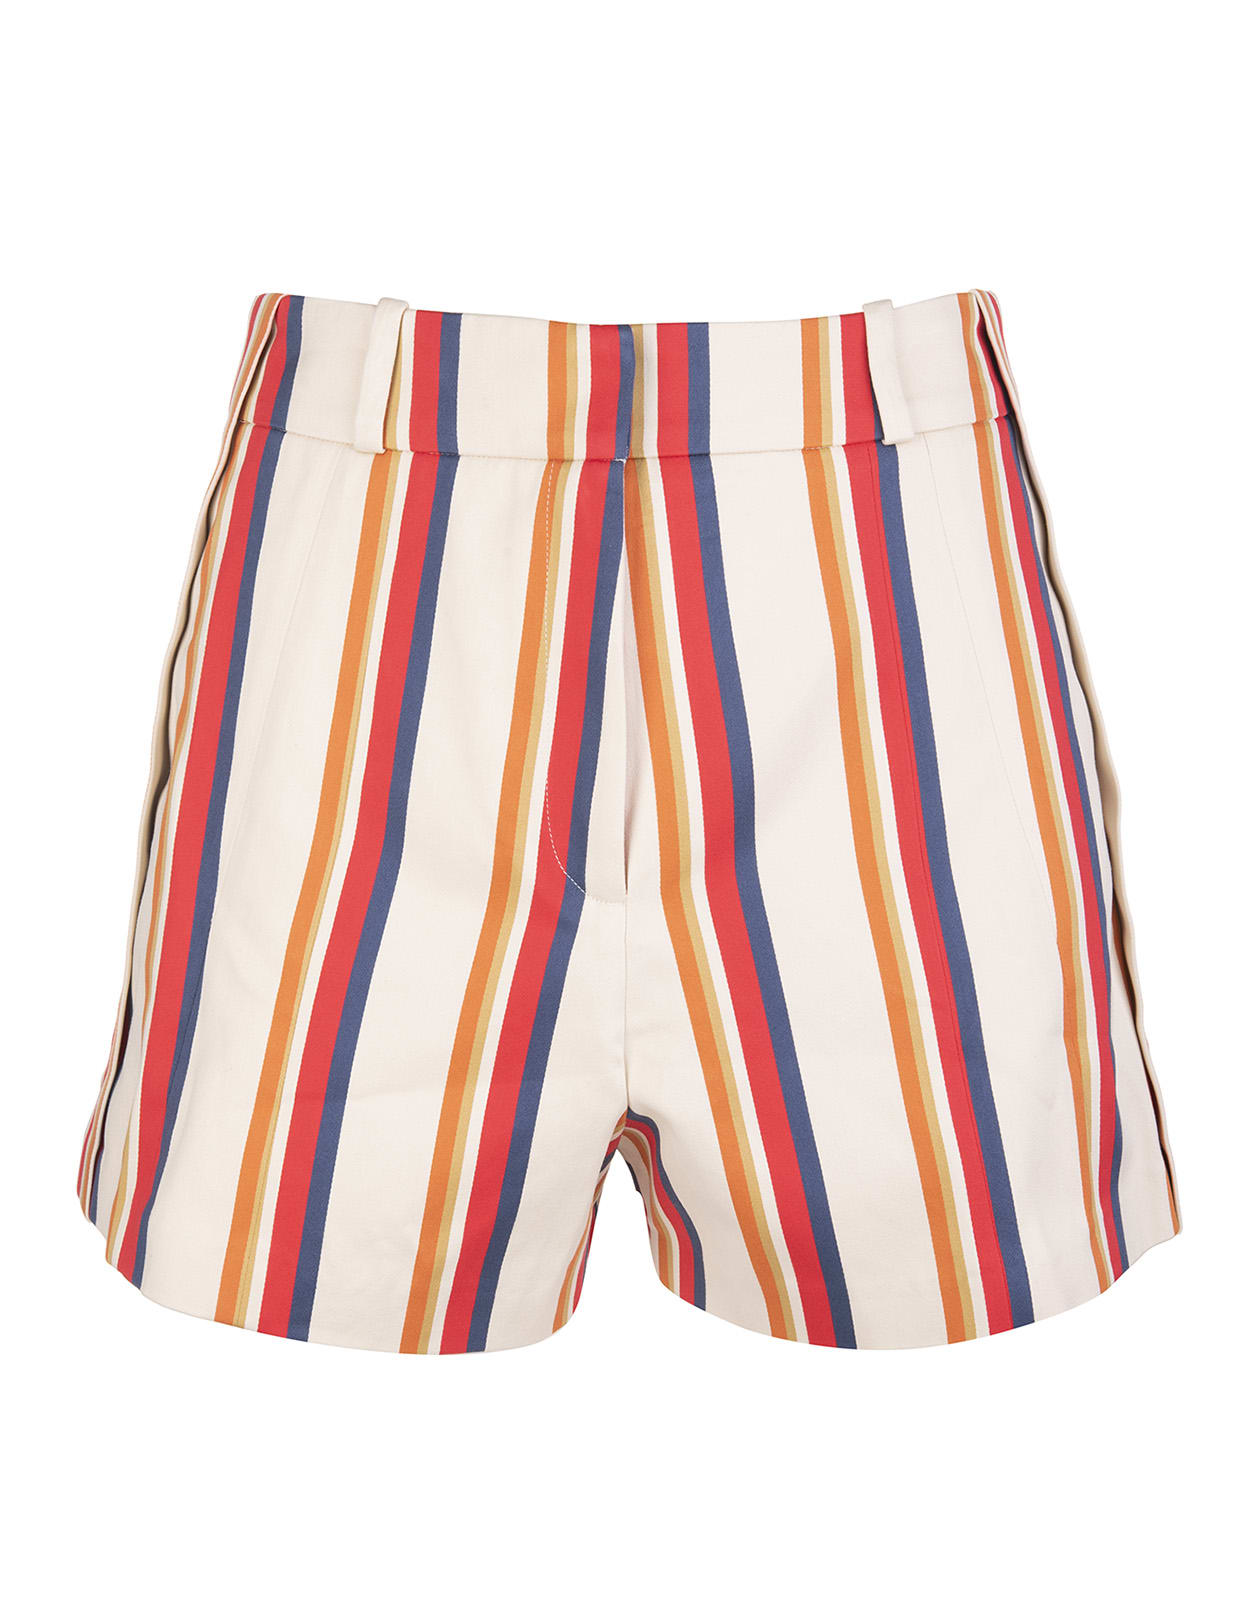 Paco Rabanne Woman Light Beige Shorts With Multicolored Stripe Pattern